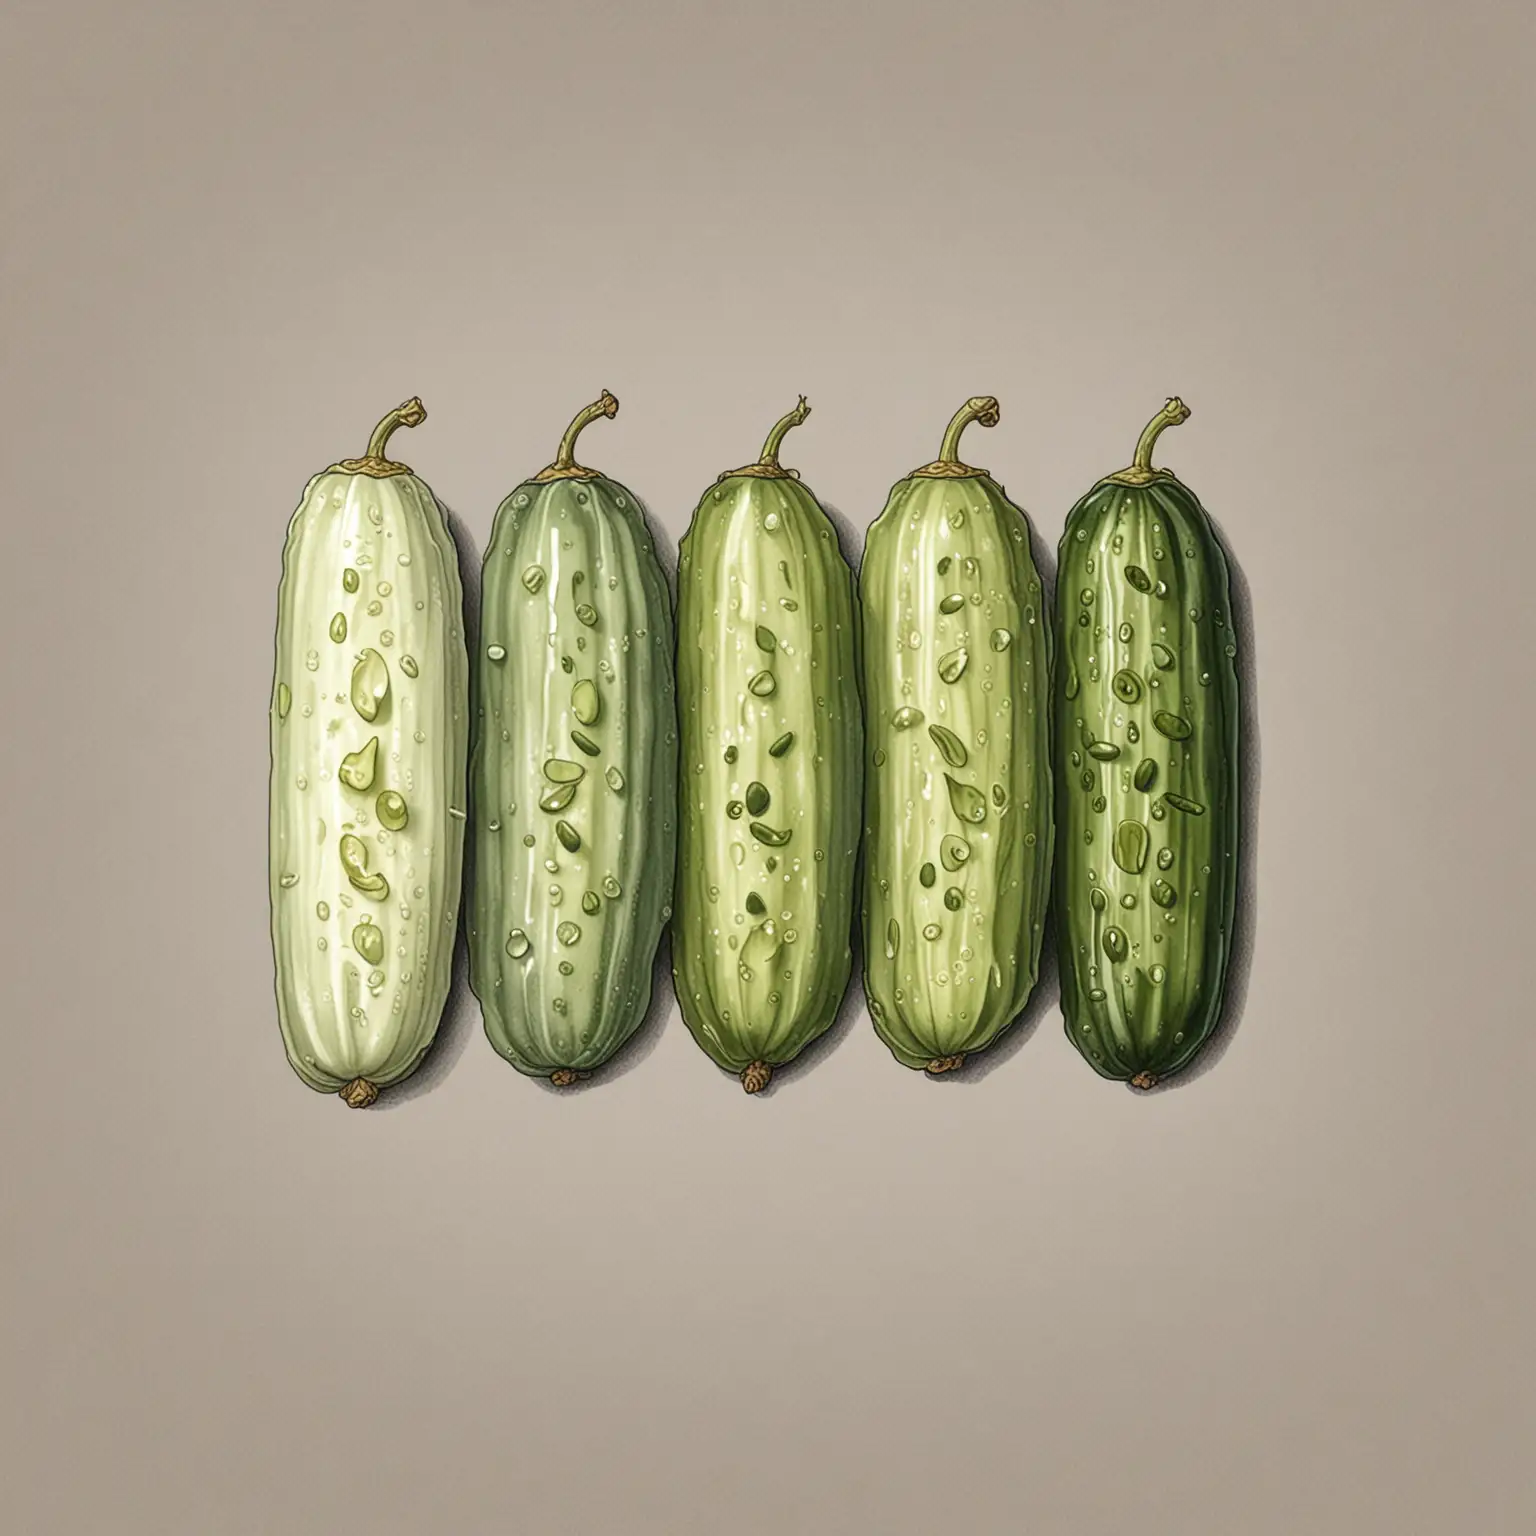 Five Thin Pickles Arranged in a Colorful Line Drawing